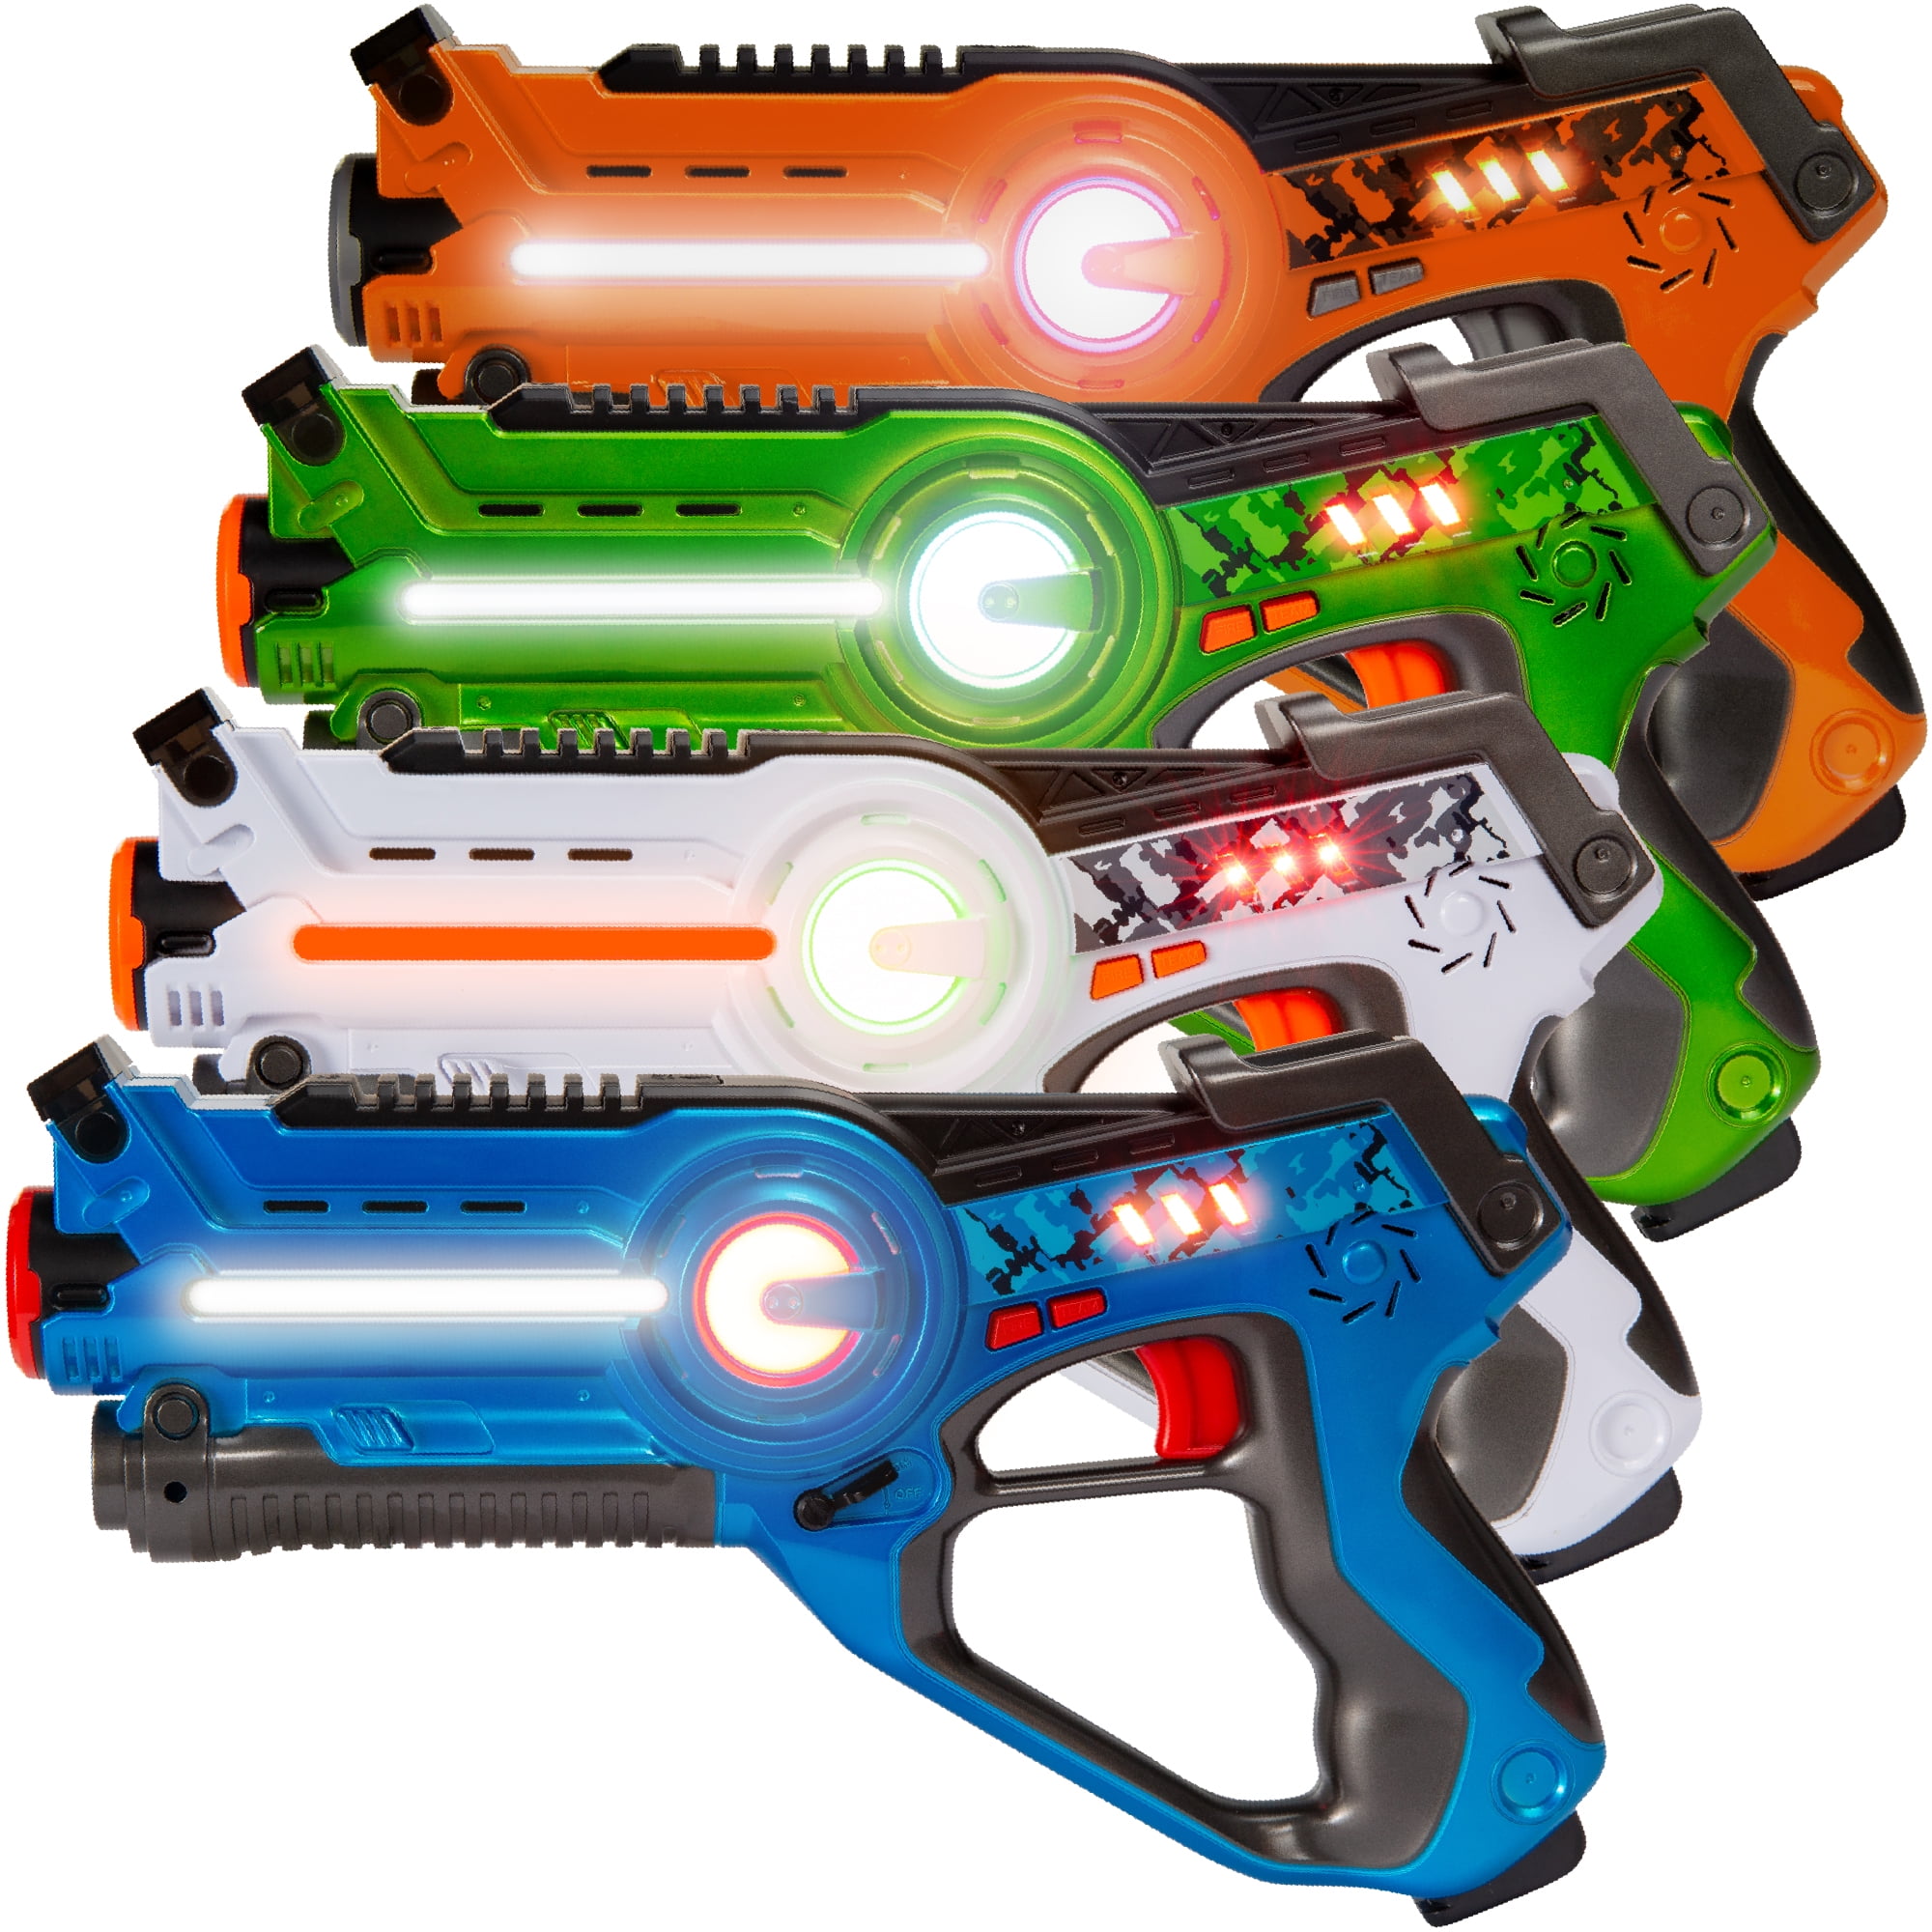 Go Outside and Play Indoor/Outdoor. Recoil Laser Tag Mulitplayer Starter Set 